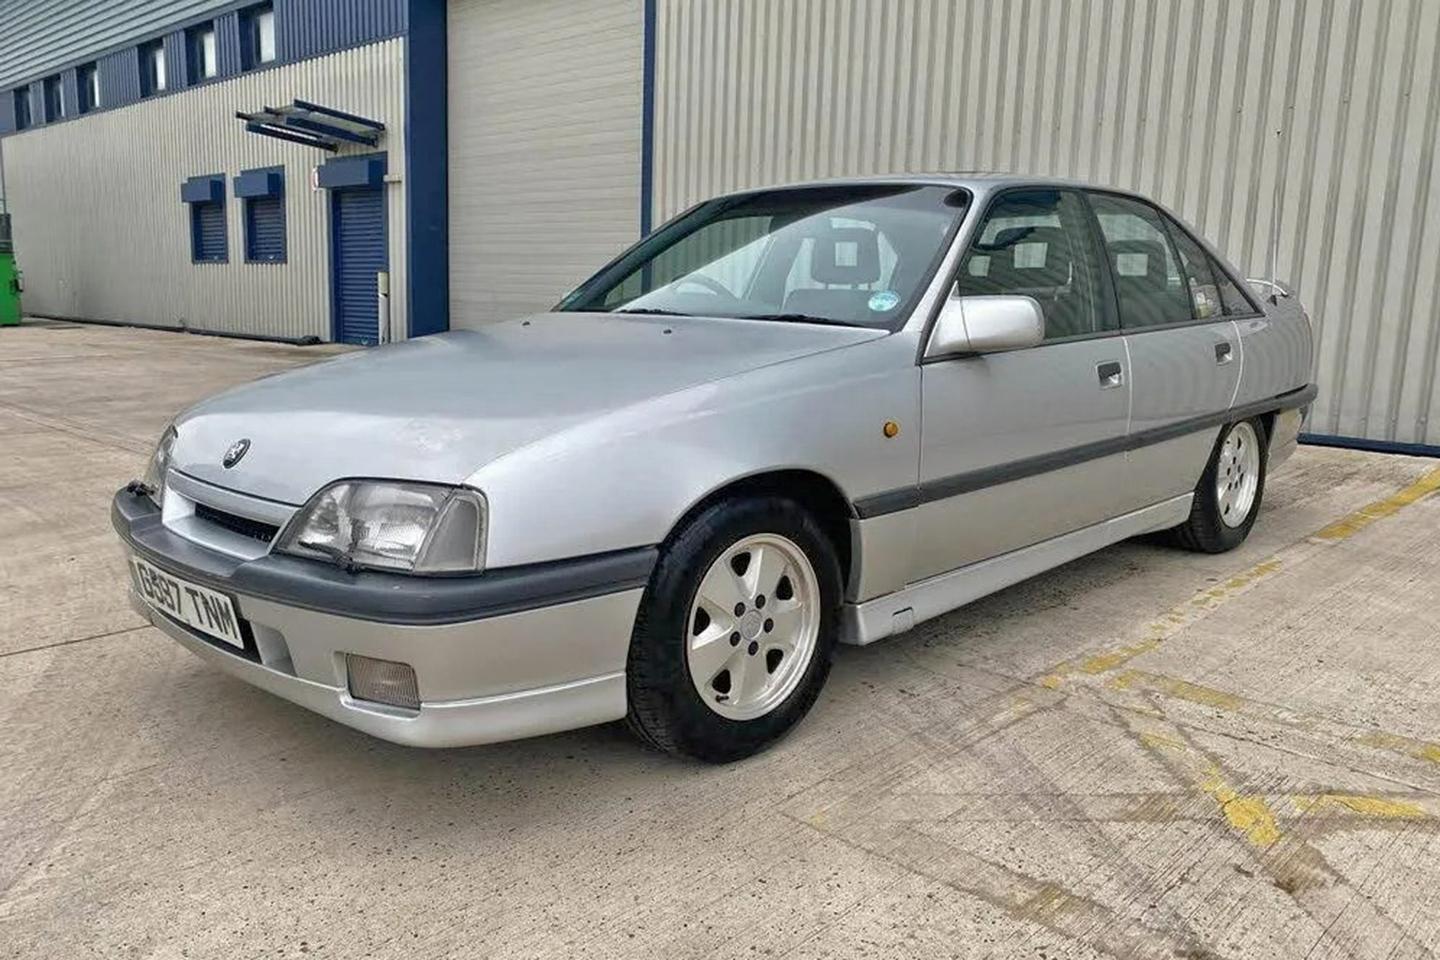 Vauxhall Carlton GSi 3000 | Spotted